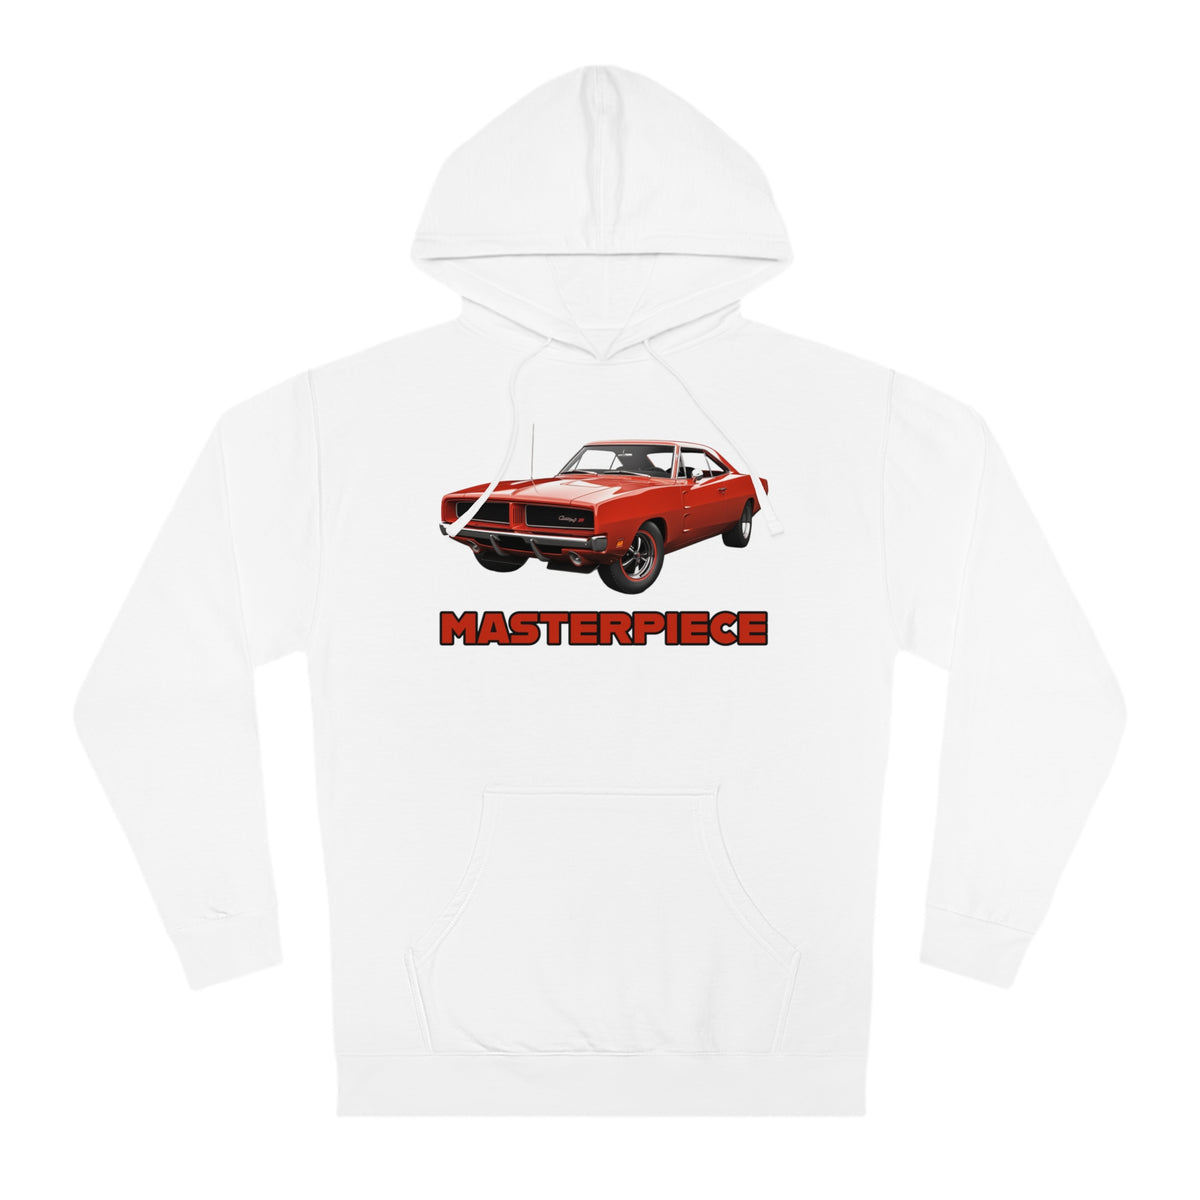 Classic Muscle Car Enthusiast Hoodie - Masterpiece Edition Hooded Sweatshirt